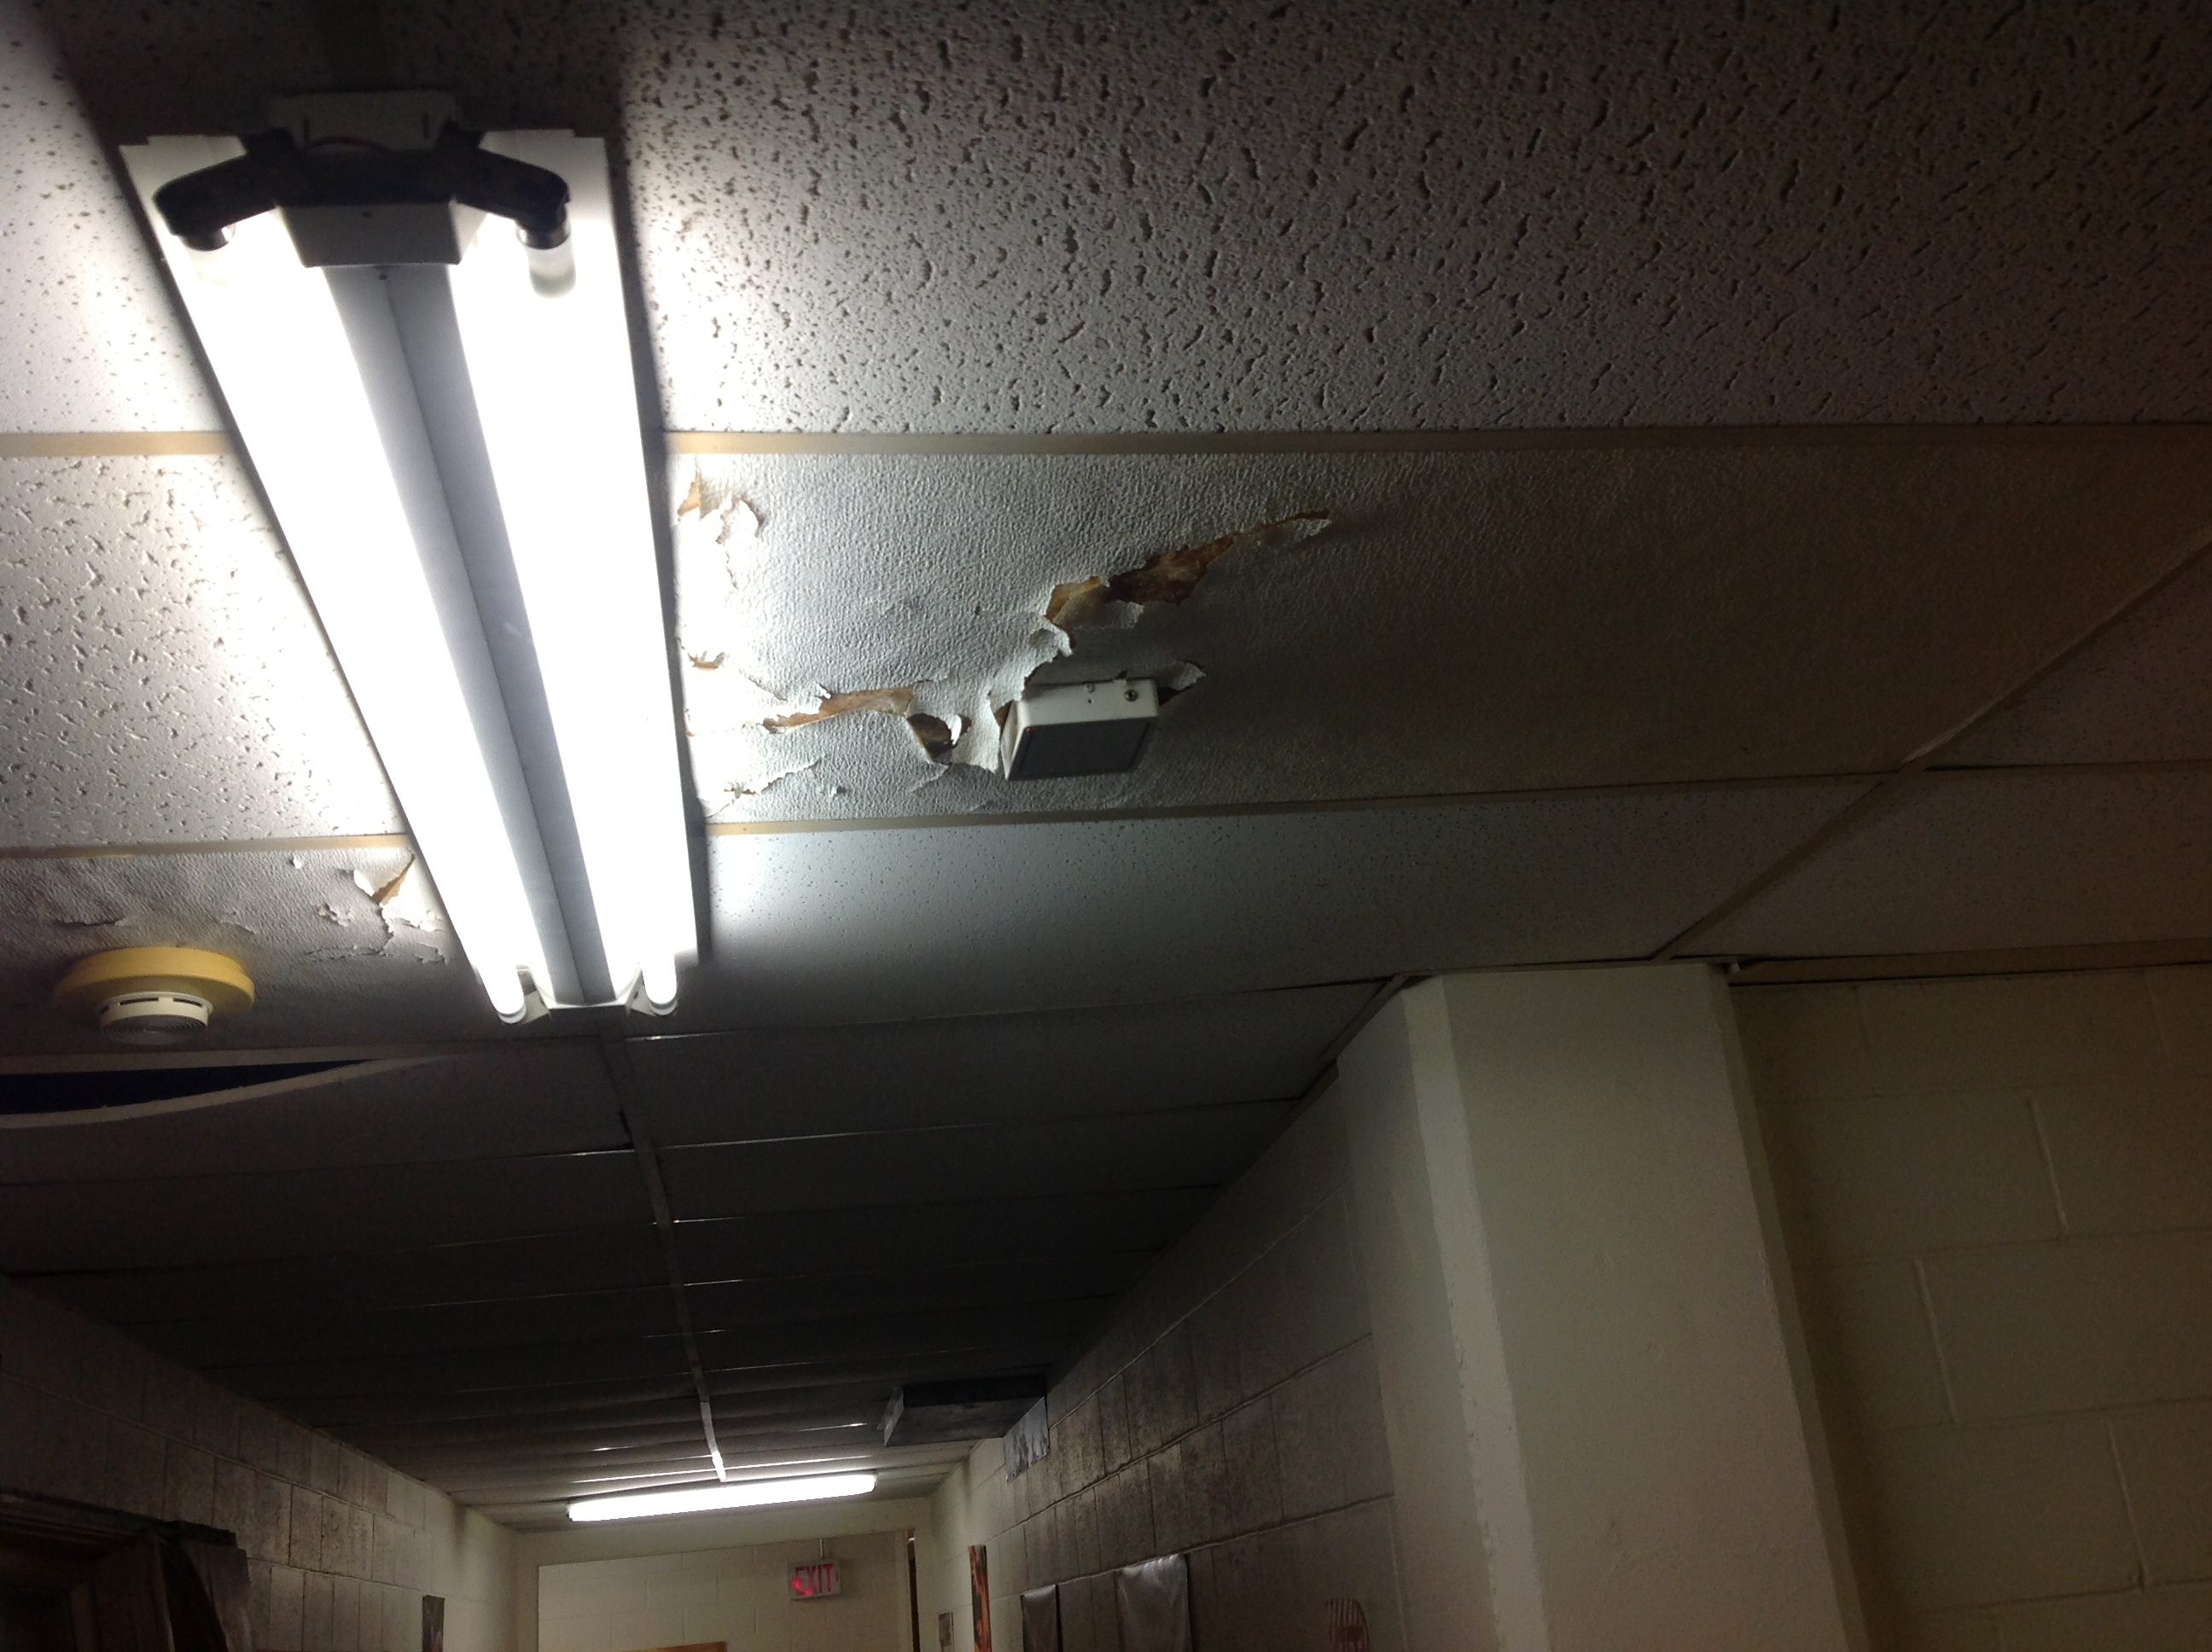 Ceiling tiles quite possibly exhibiting signs of moisture damage.